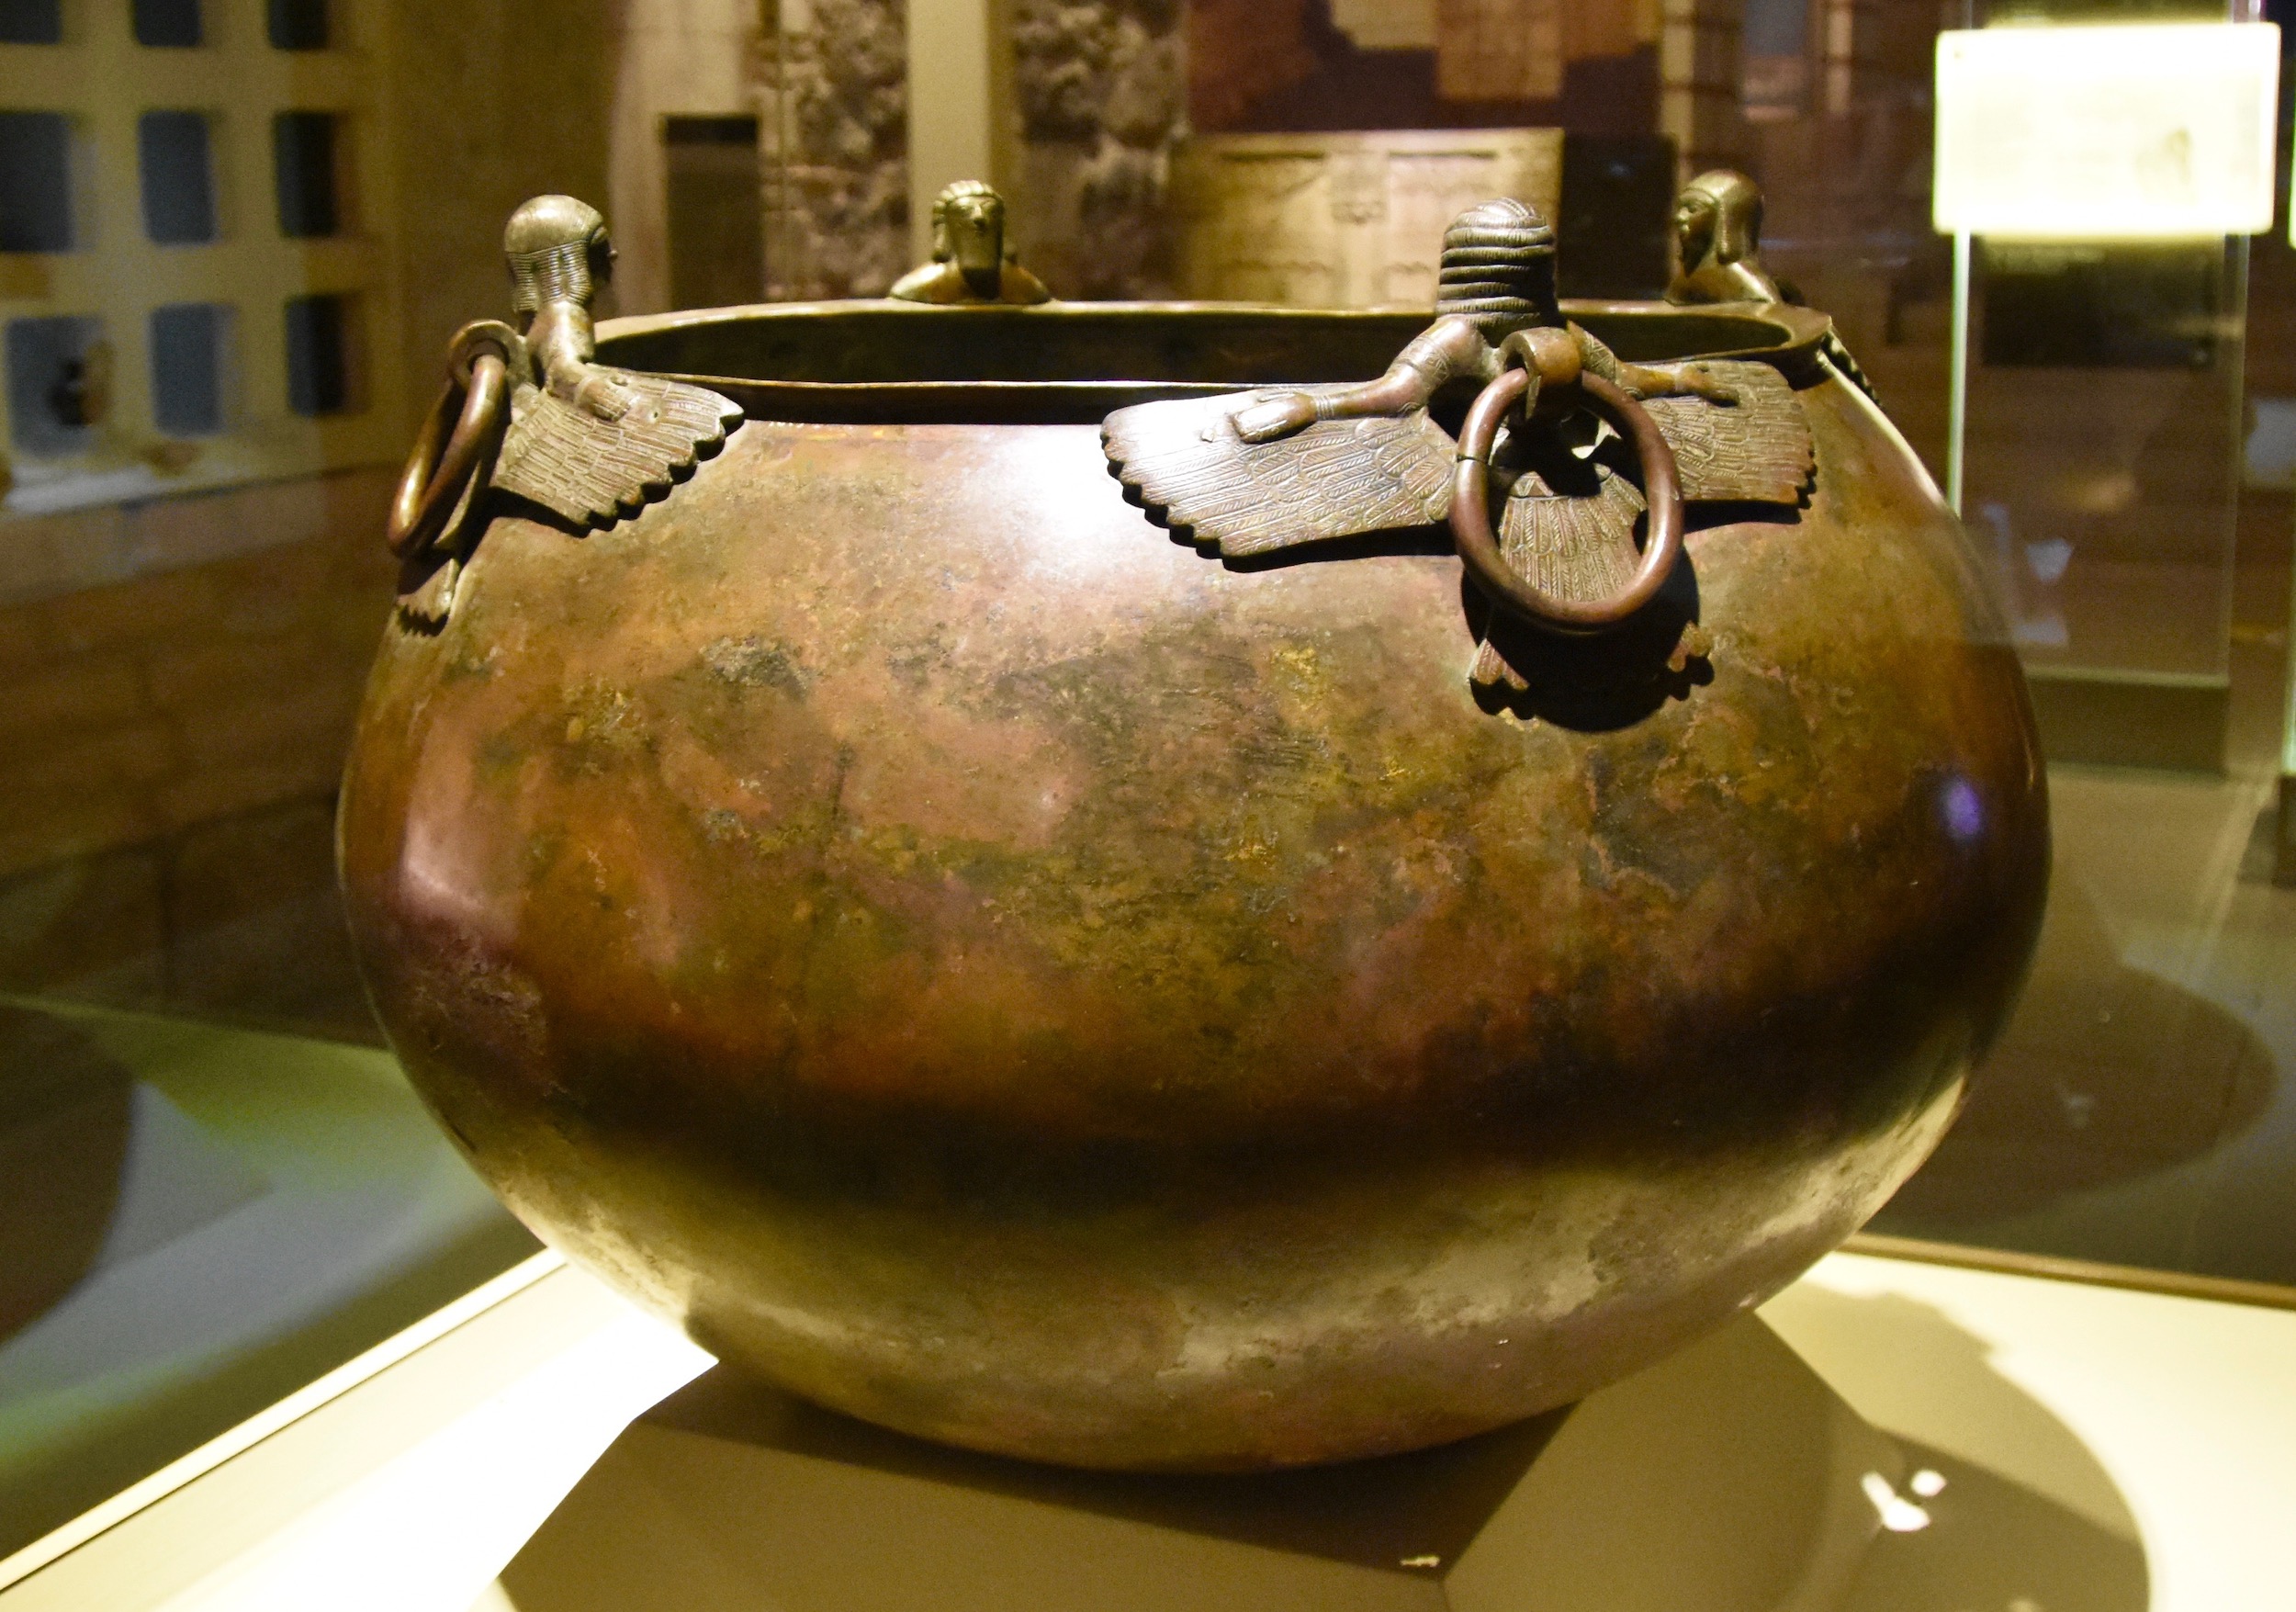 Funereal Serving Bowl, Museum of Anatolian Civilizations